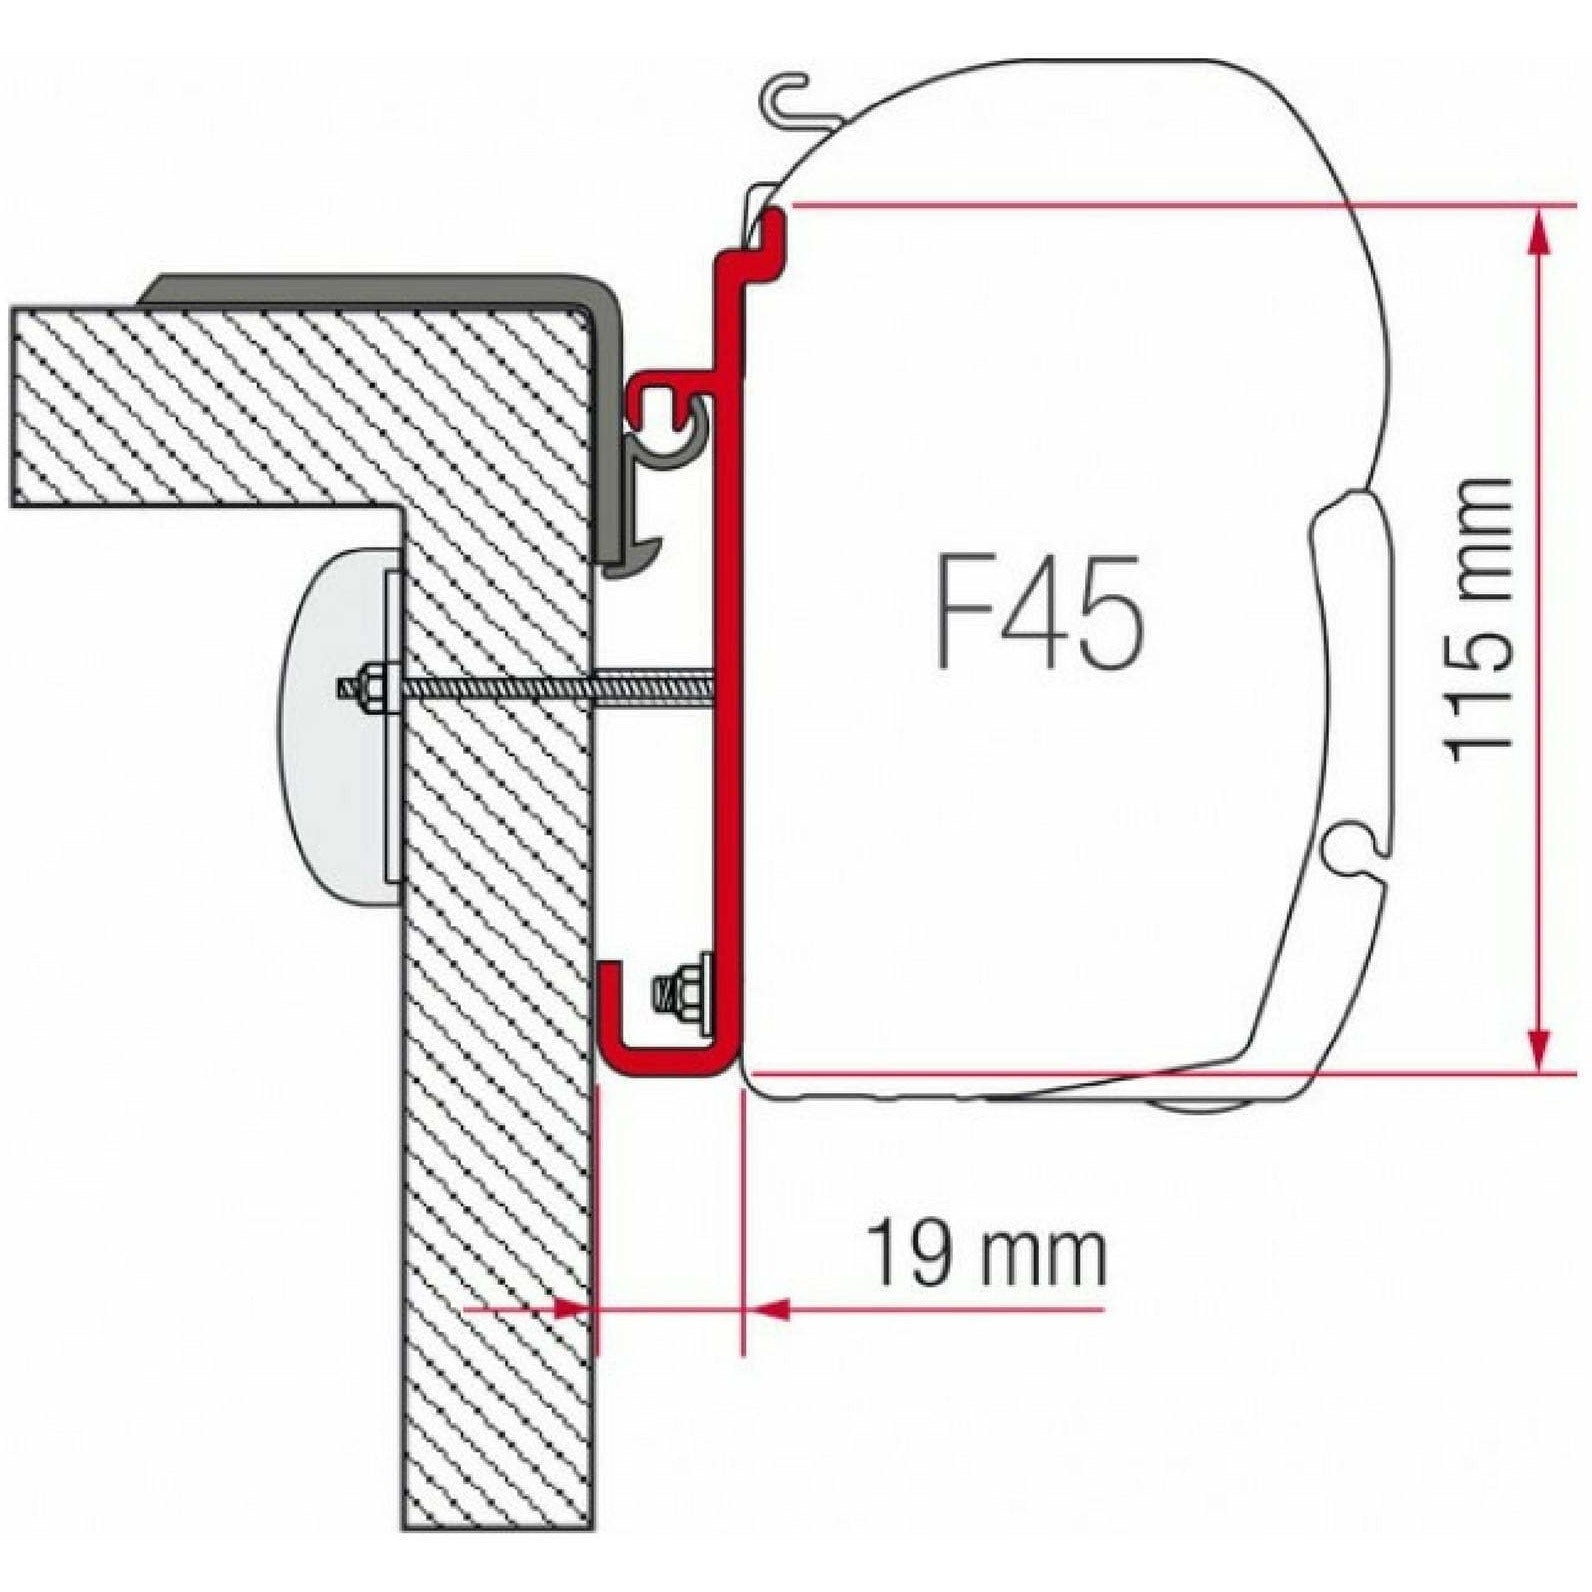 Fiamma Rapido Serie 7-8 Awning Adapter Kit made by Fiamma. A Awning Adapter sold by Quality Caravan Awnings